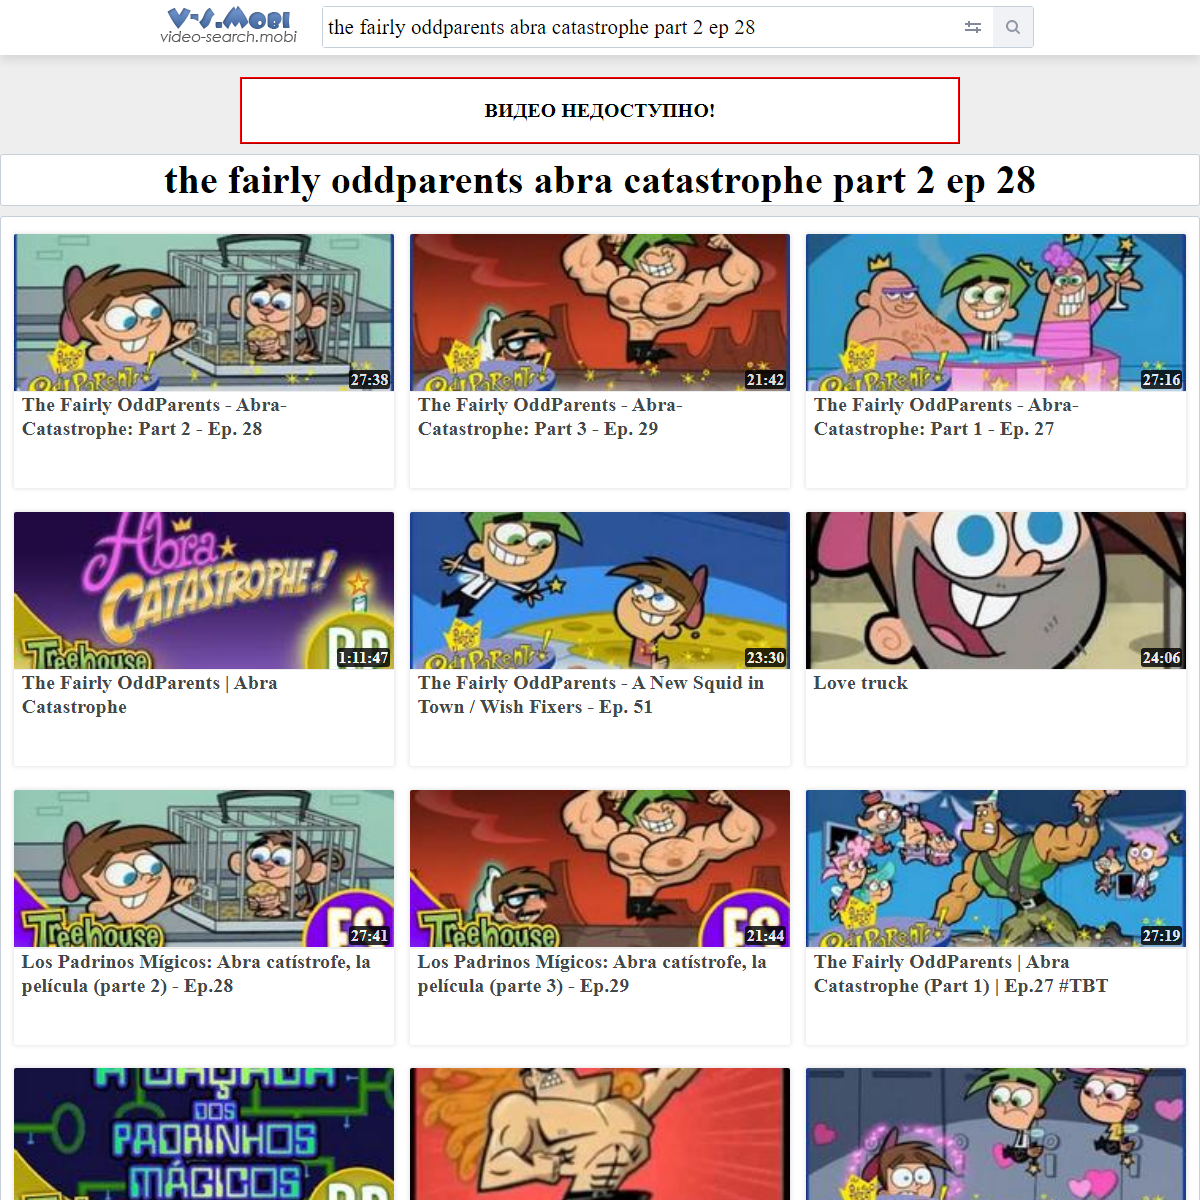 A complete backup of https://v-s.mobi/the-fairly-oddparents-abra-catastrophe-part-2-ep-28-27:38